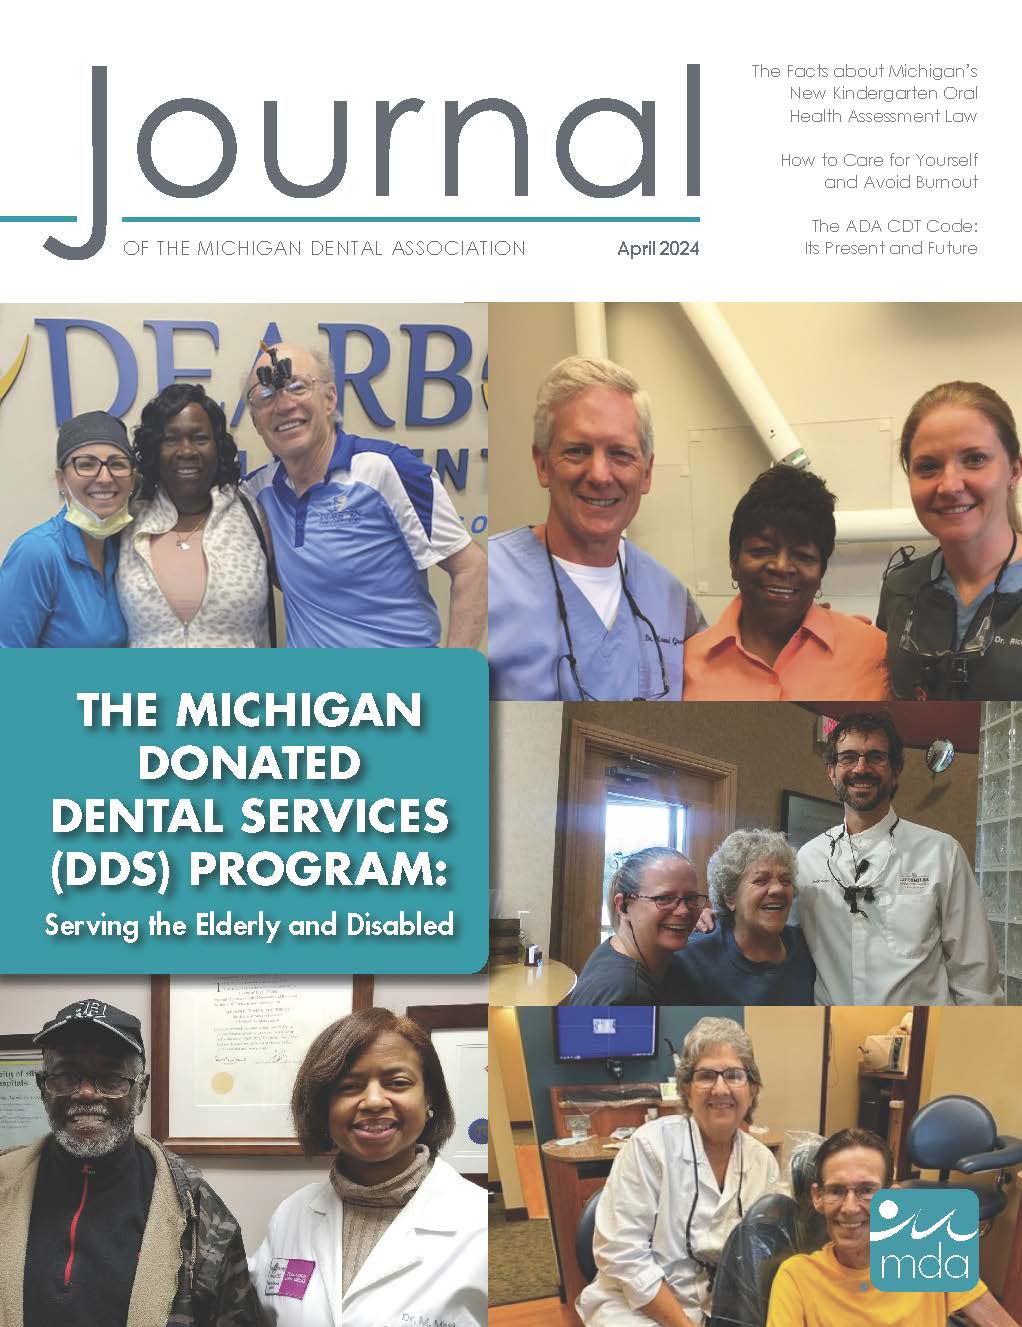 Cover of the Journal of the Michigan Dental Association featuring multiple photos of dentists posing with elderly patients.